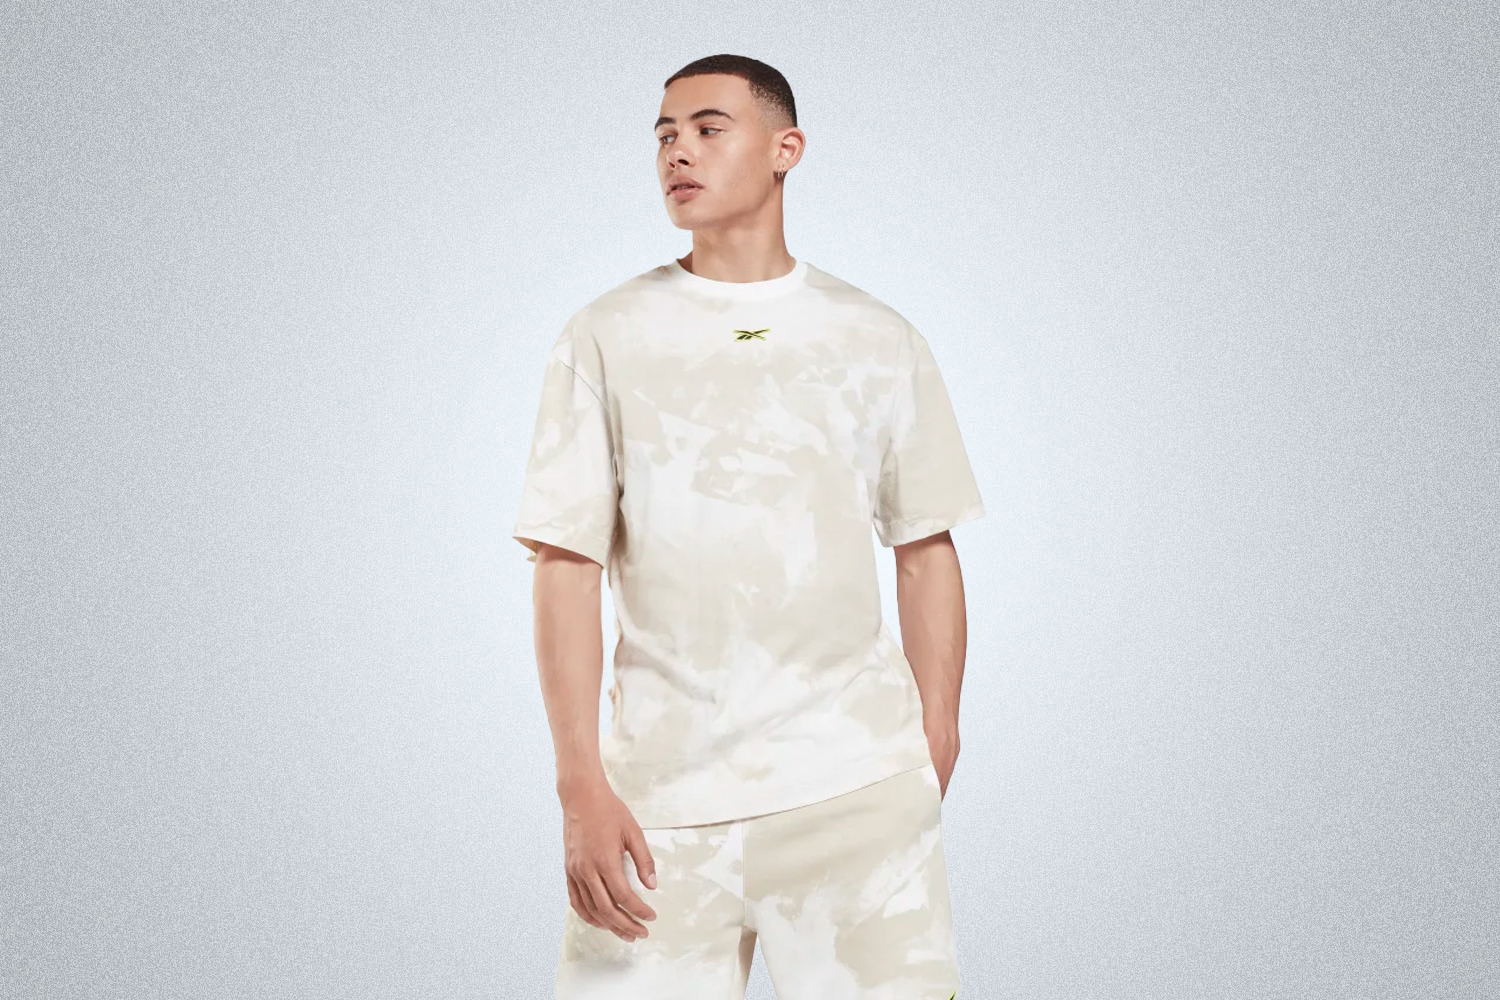 The Reebok MYT Tee is perfect for style and comfort in 2022